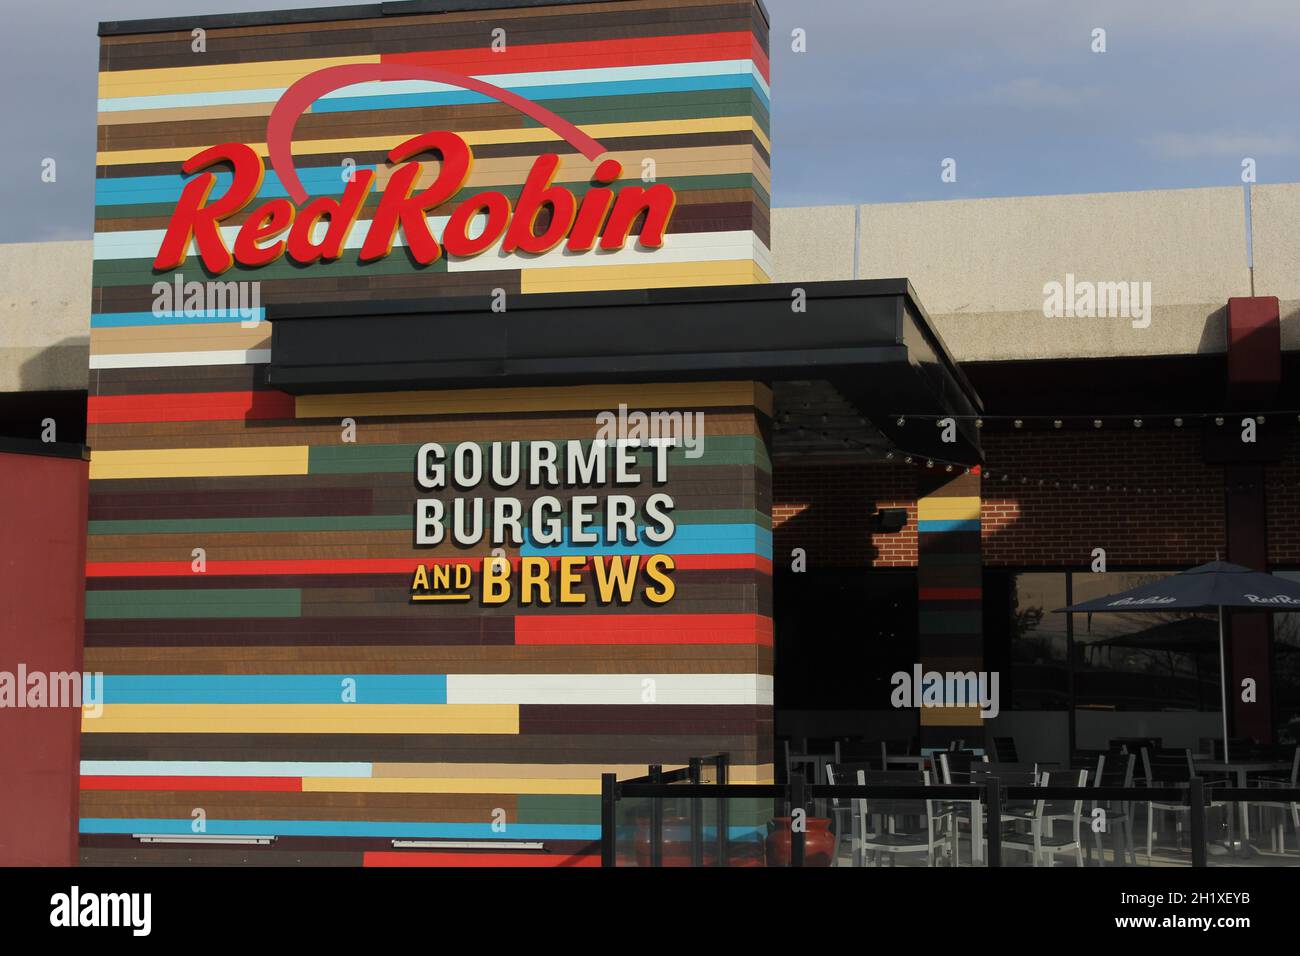 Wichita Falls, TX - February 8, 2019: Red Robin Restaurant located in the Sikes Senter Mall Stock Photo